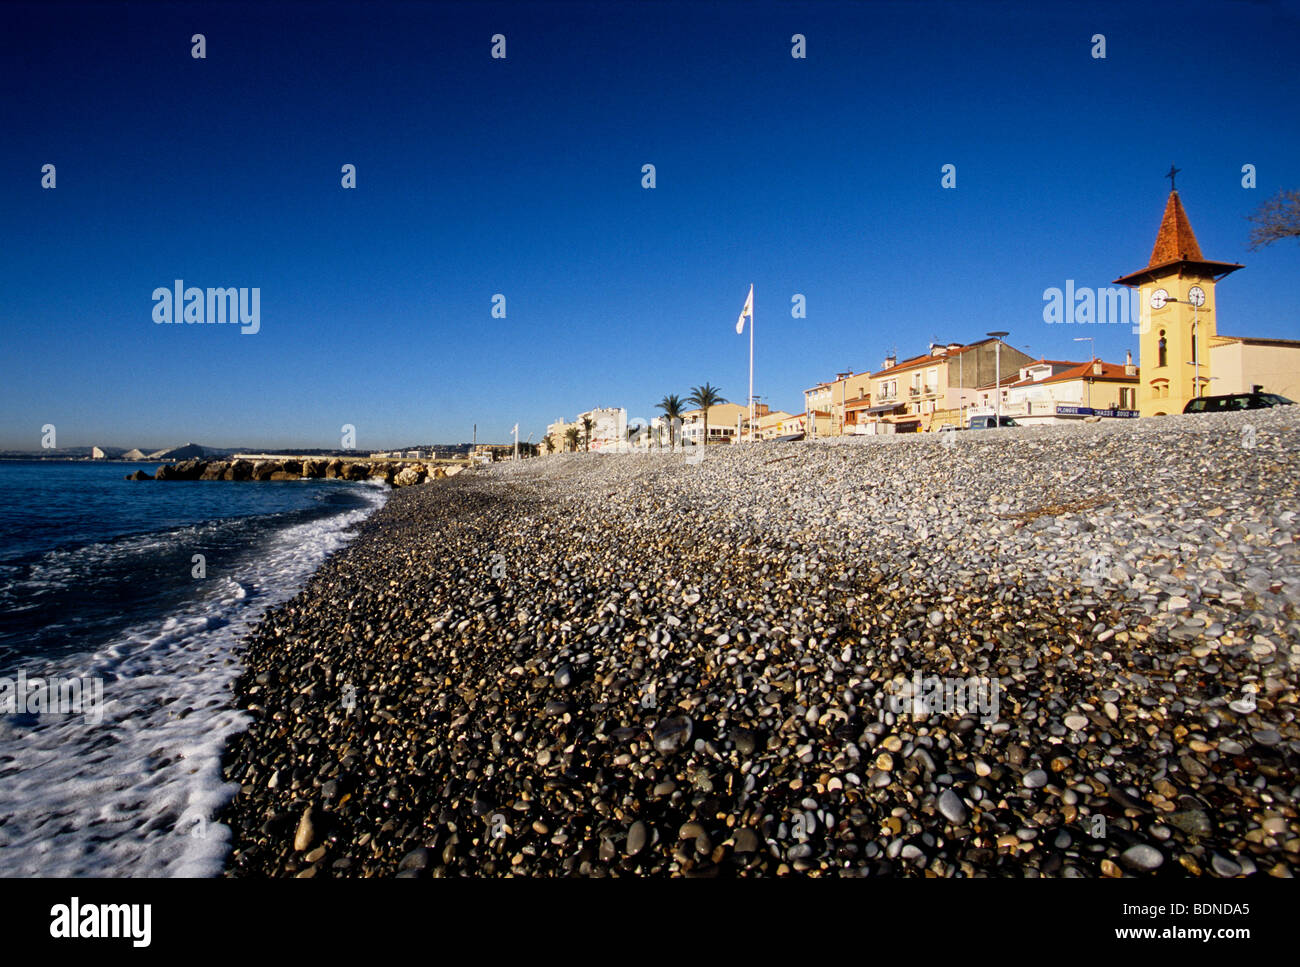 The beach of the city of Cros de Cagnes Alpes-MAritimes 06 PACA Cote d'azur French Riviera France Europe Stock Photo